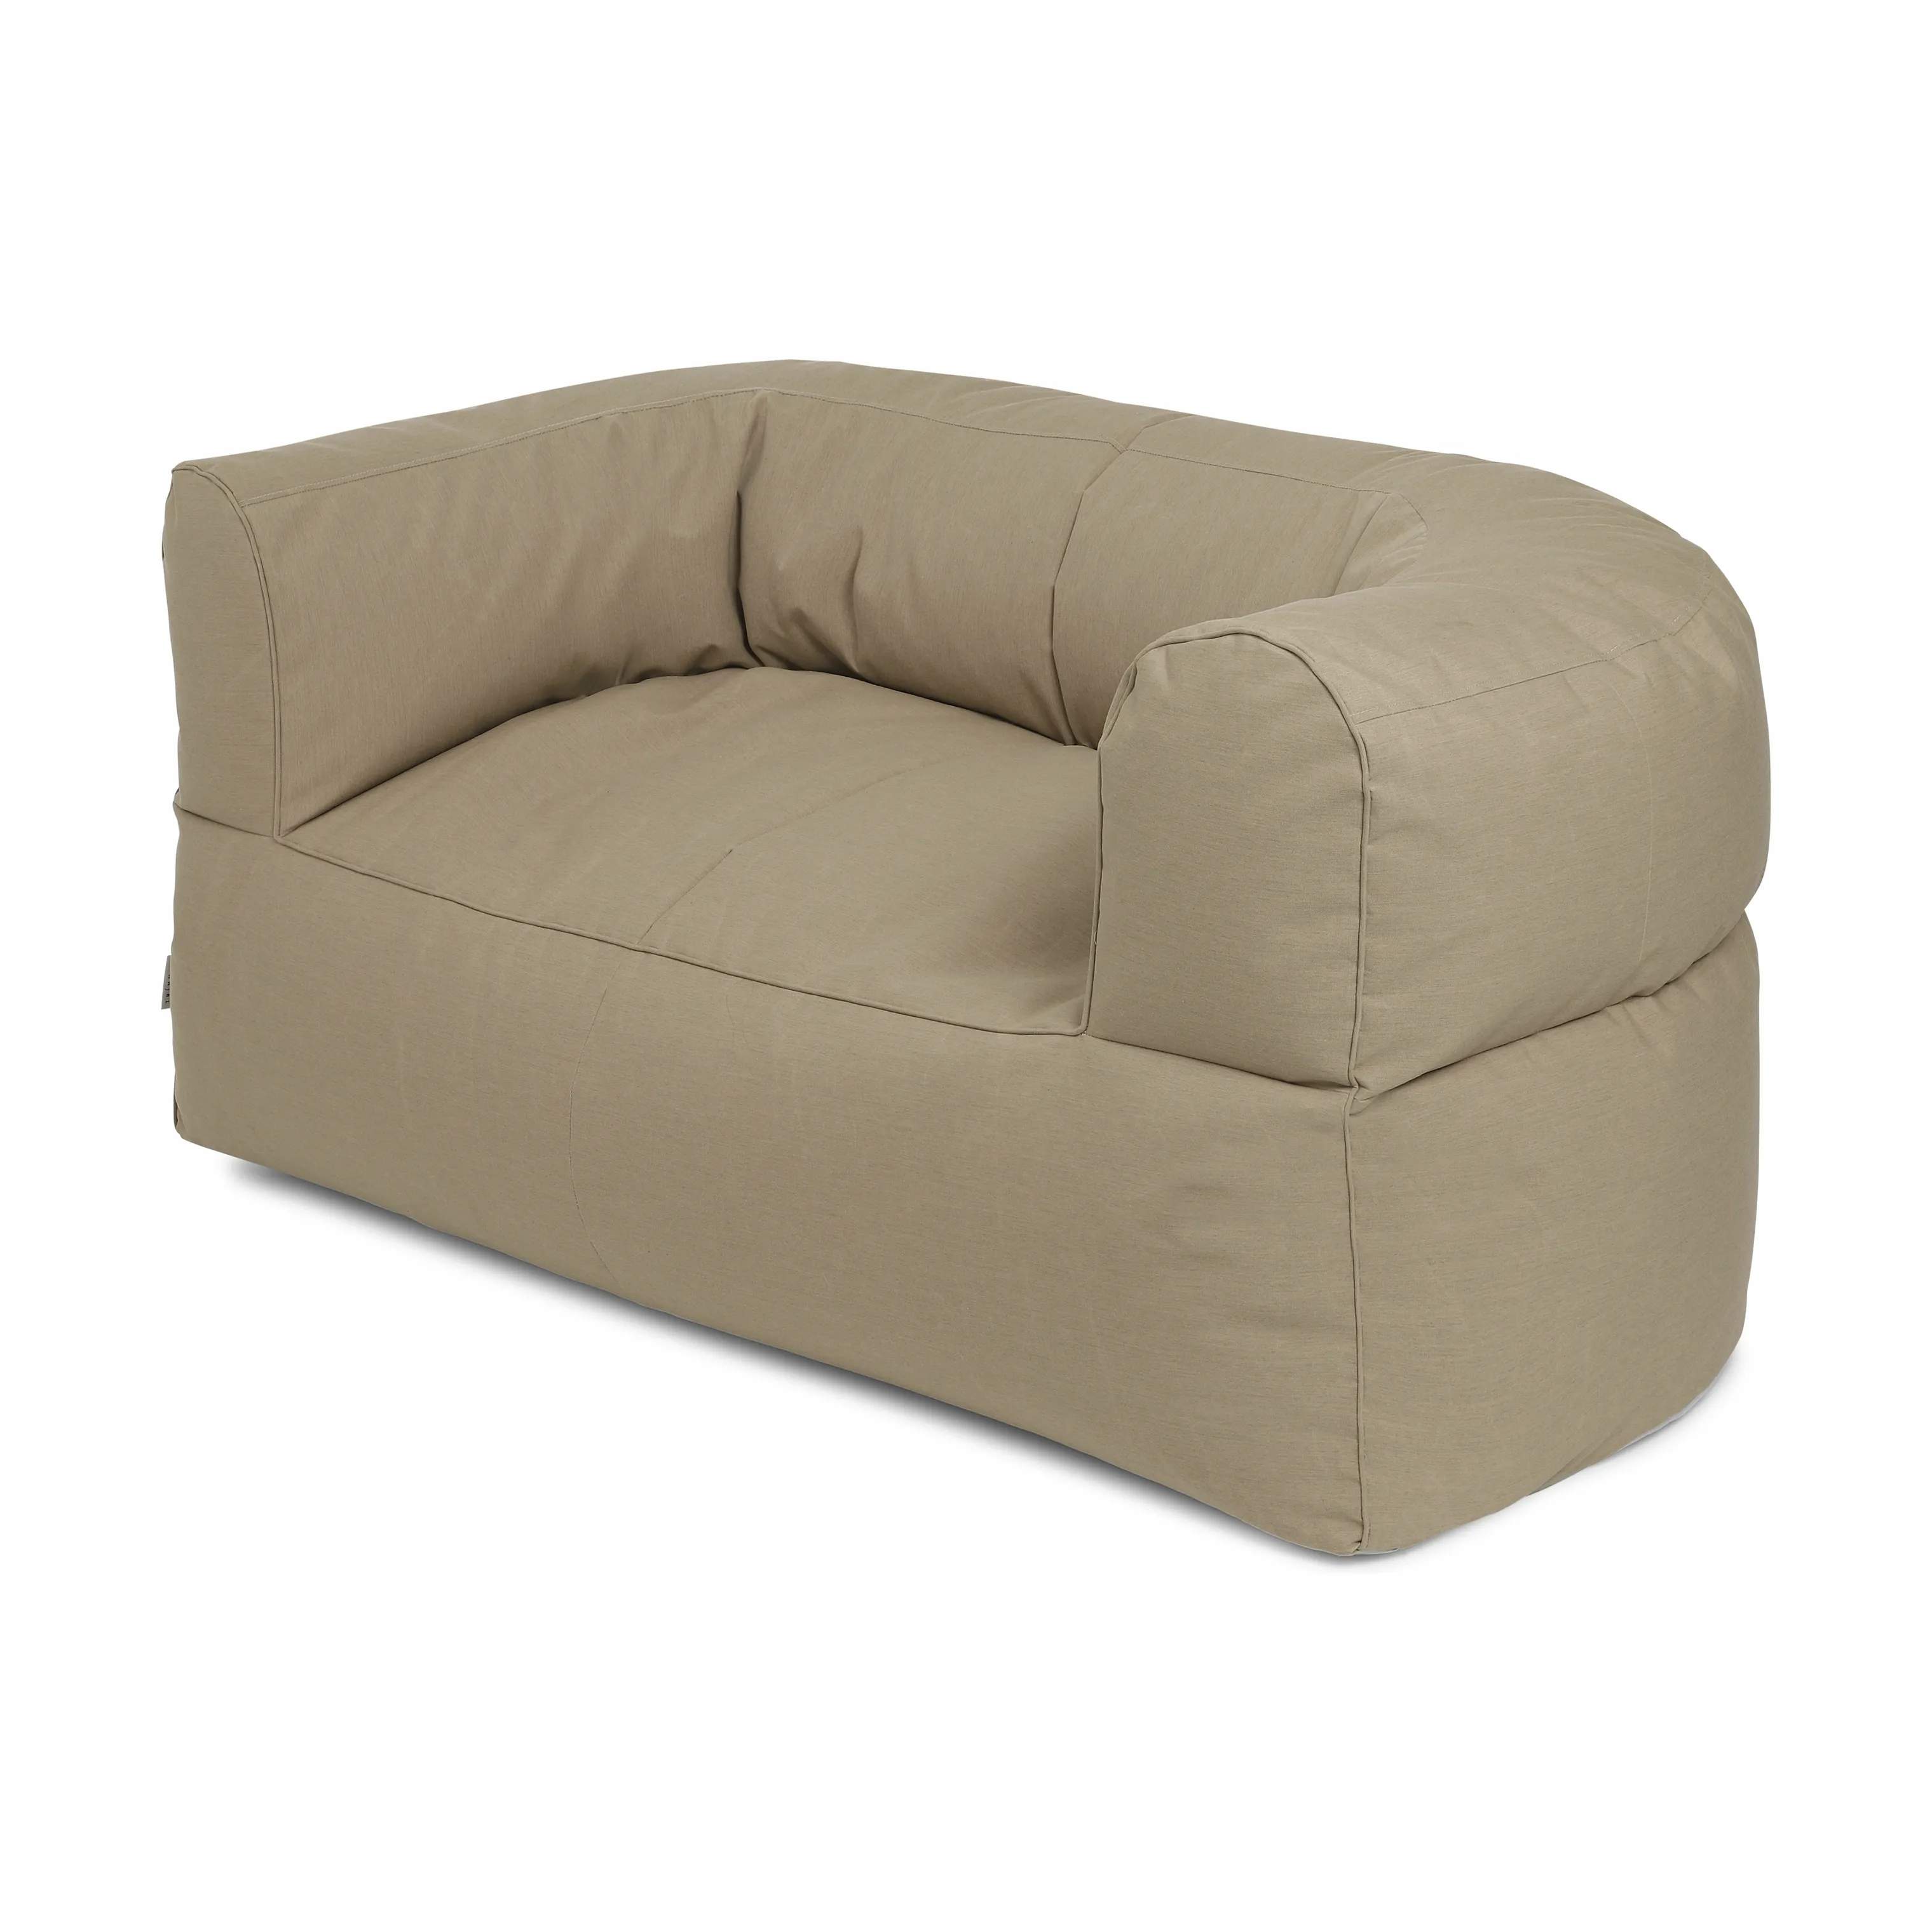 Arm-Strong Sofa, taupe, large